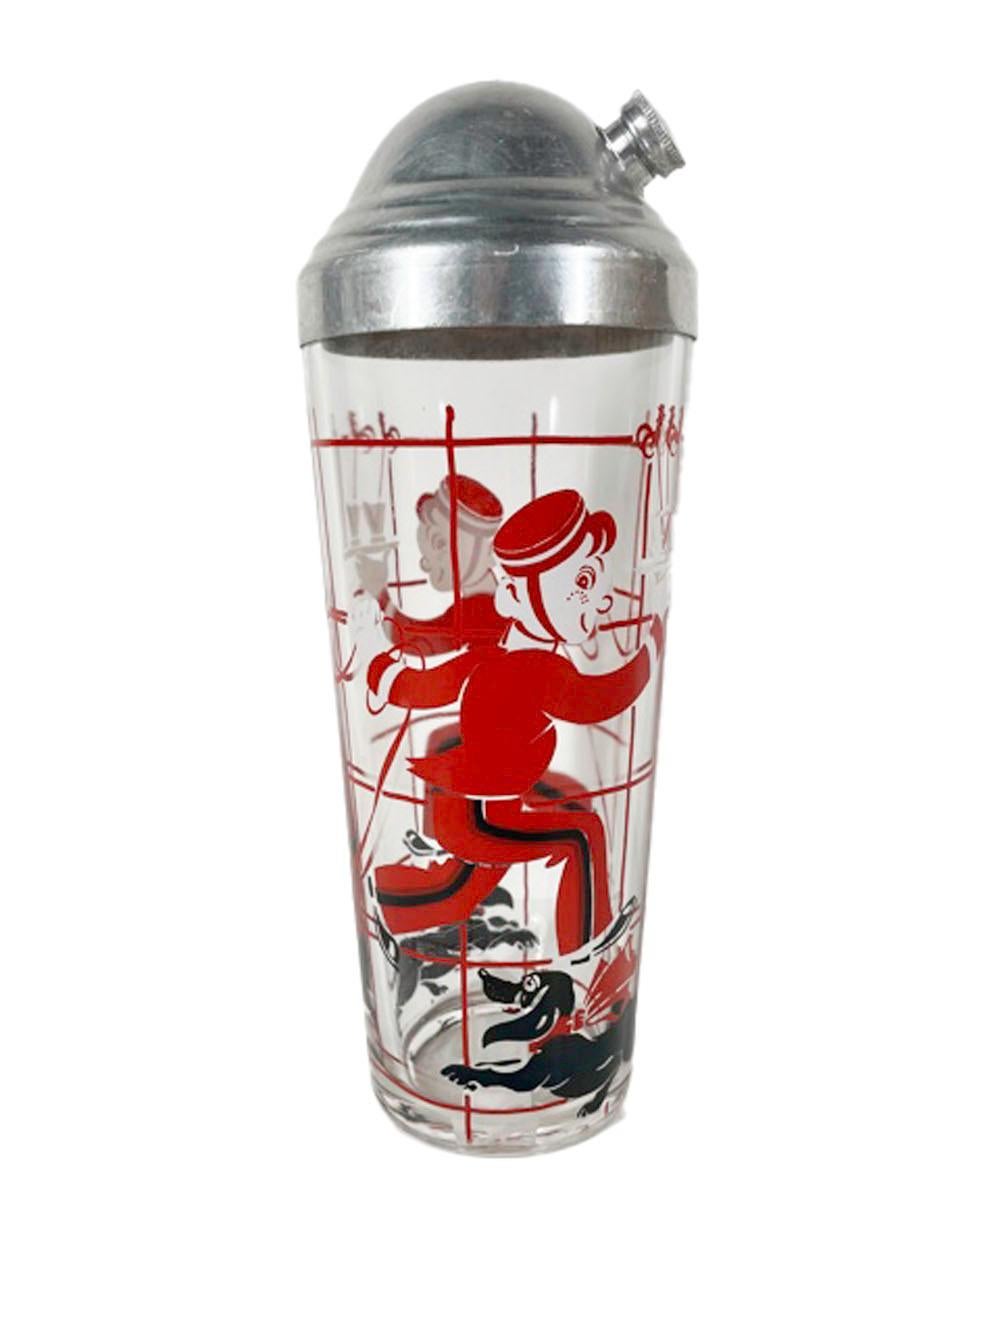 Art Deco cocktail shaker and 6 cocktail glasses decorated in red, white and black enamel on clear glass, with a bellhop carrying a serving tray with cocktails while walking a dachshund on a leash.